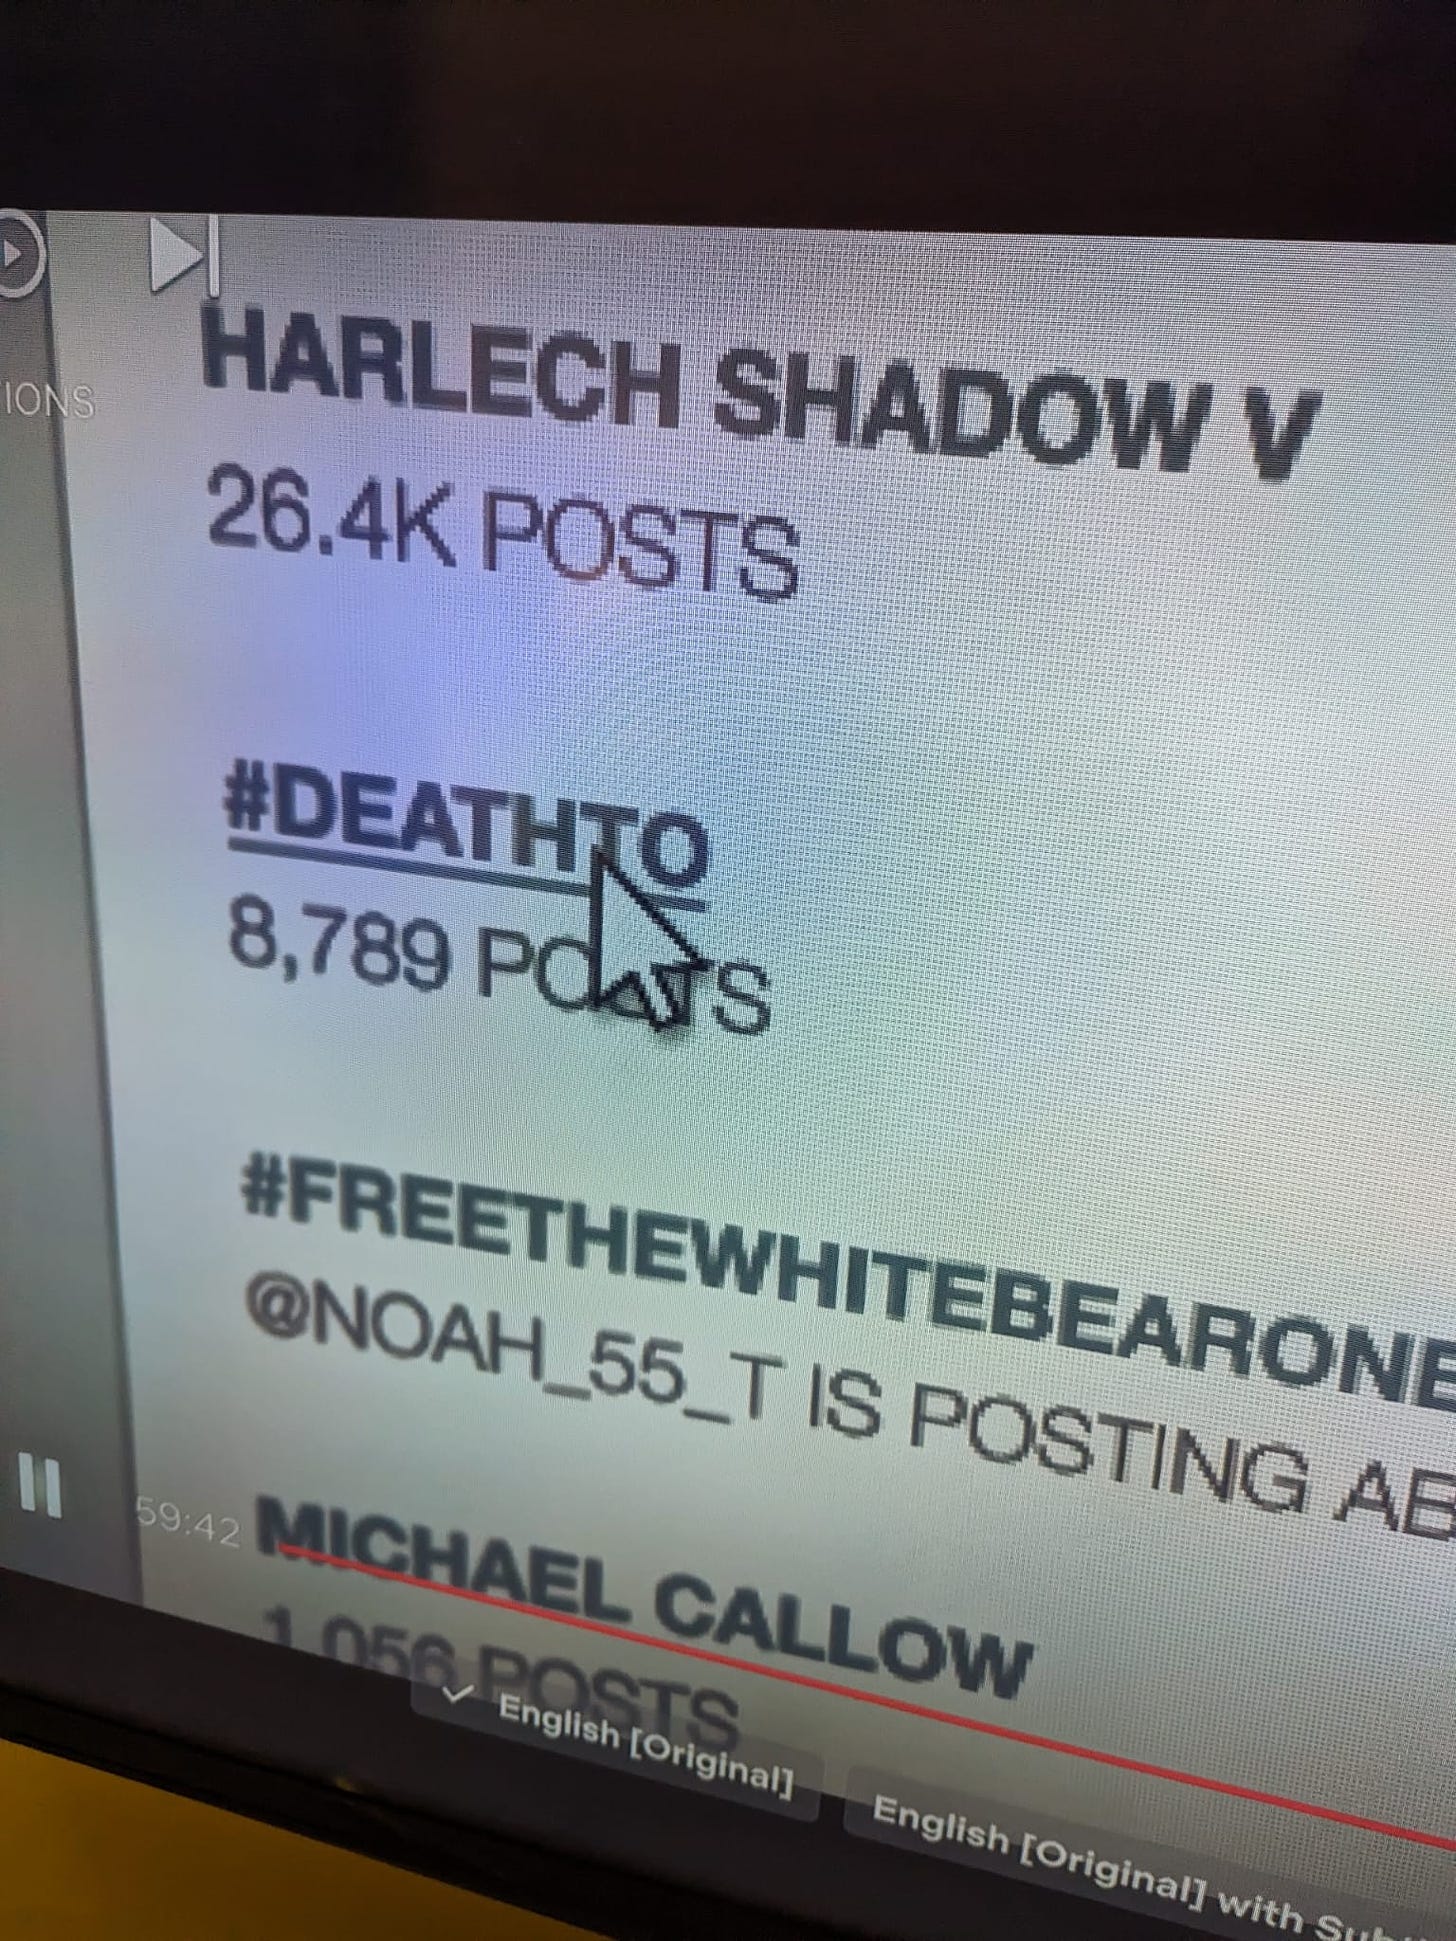 A photo of a trending page. Harlech Shadov V 26.4K posts #DeathTo 8,789 posts #FreeTheWhiteBearOne ANoah_55_T is posting Michael Callow 1,056 posts